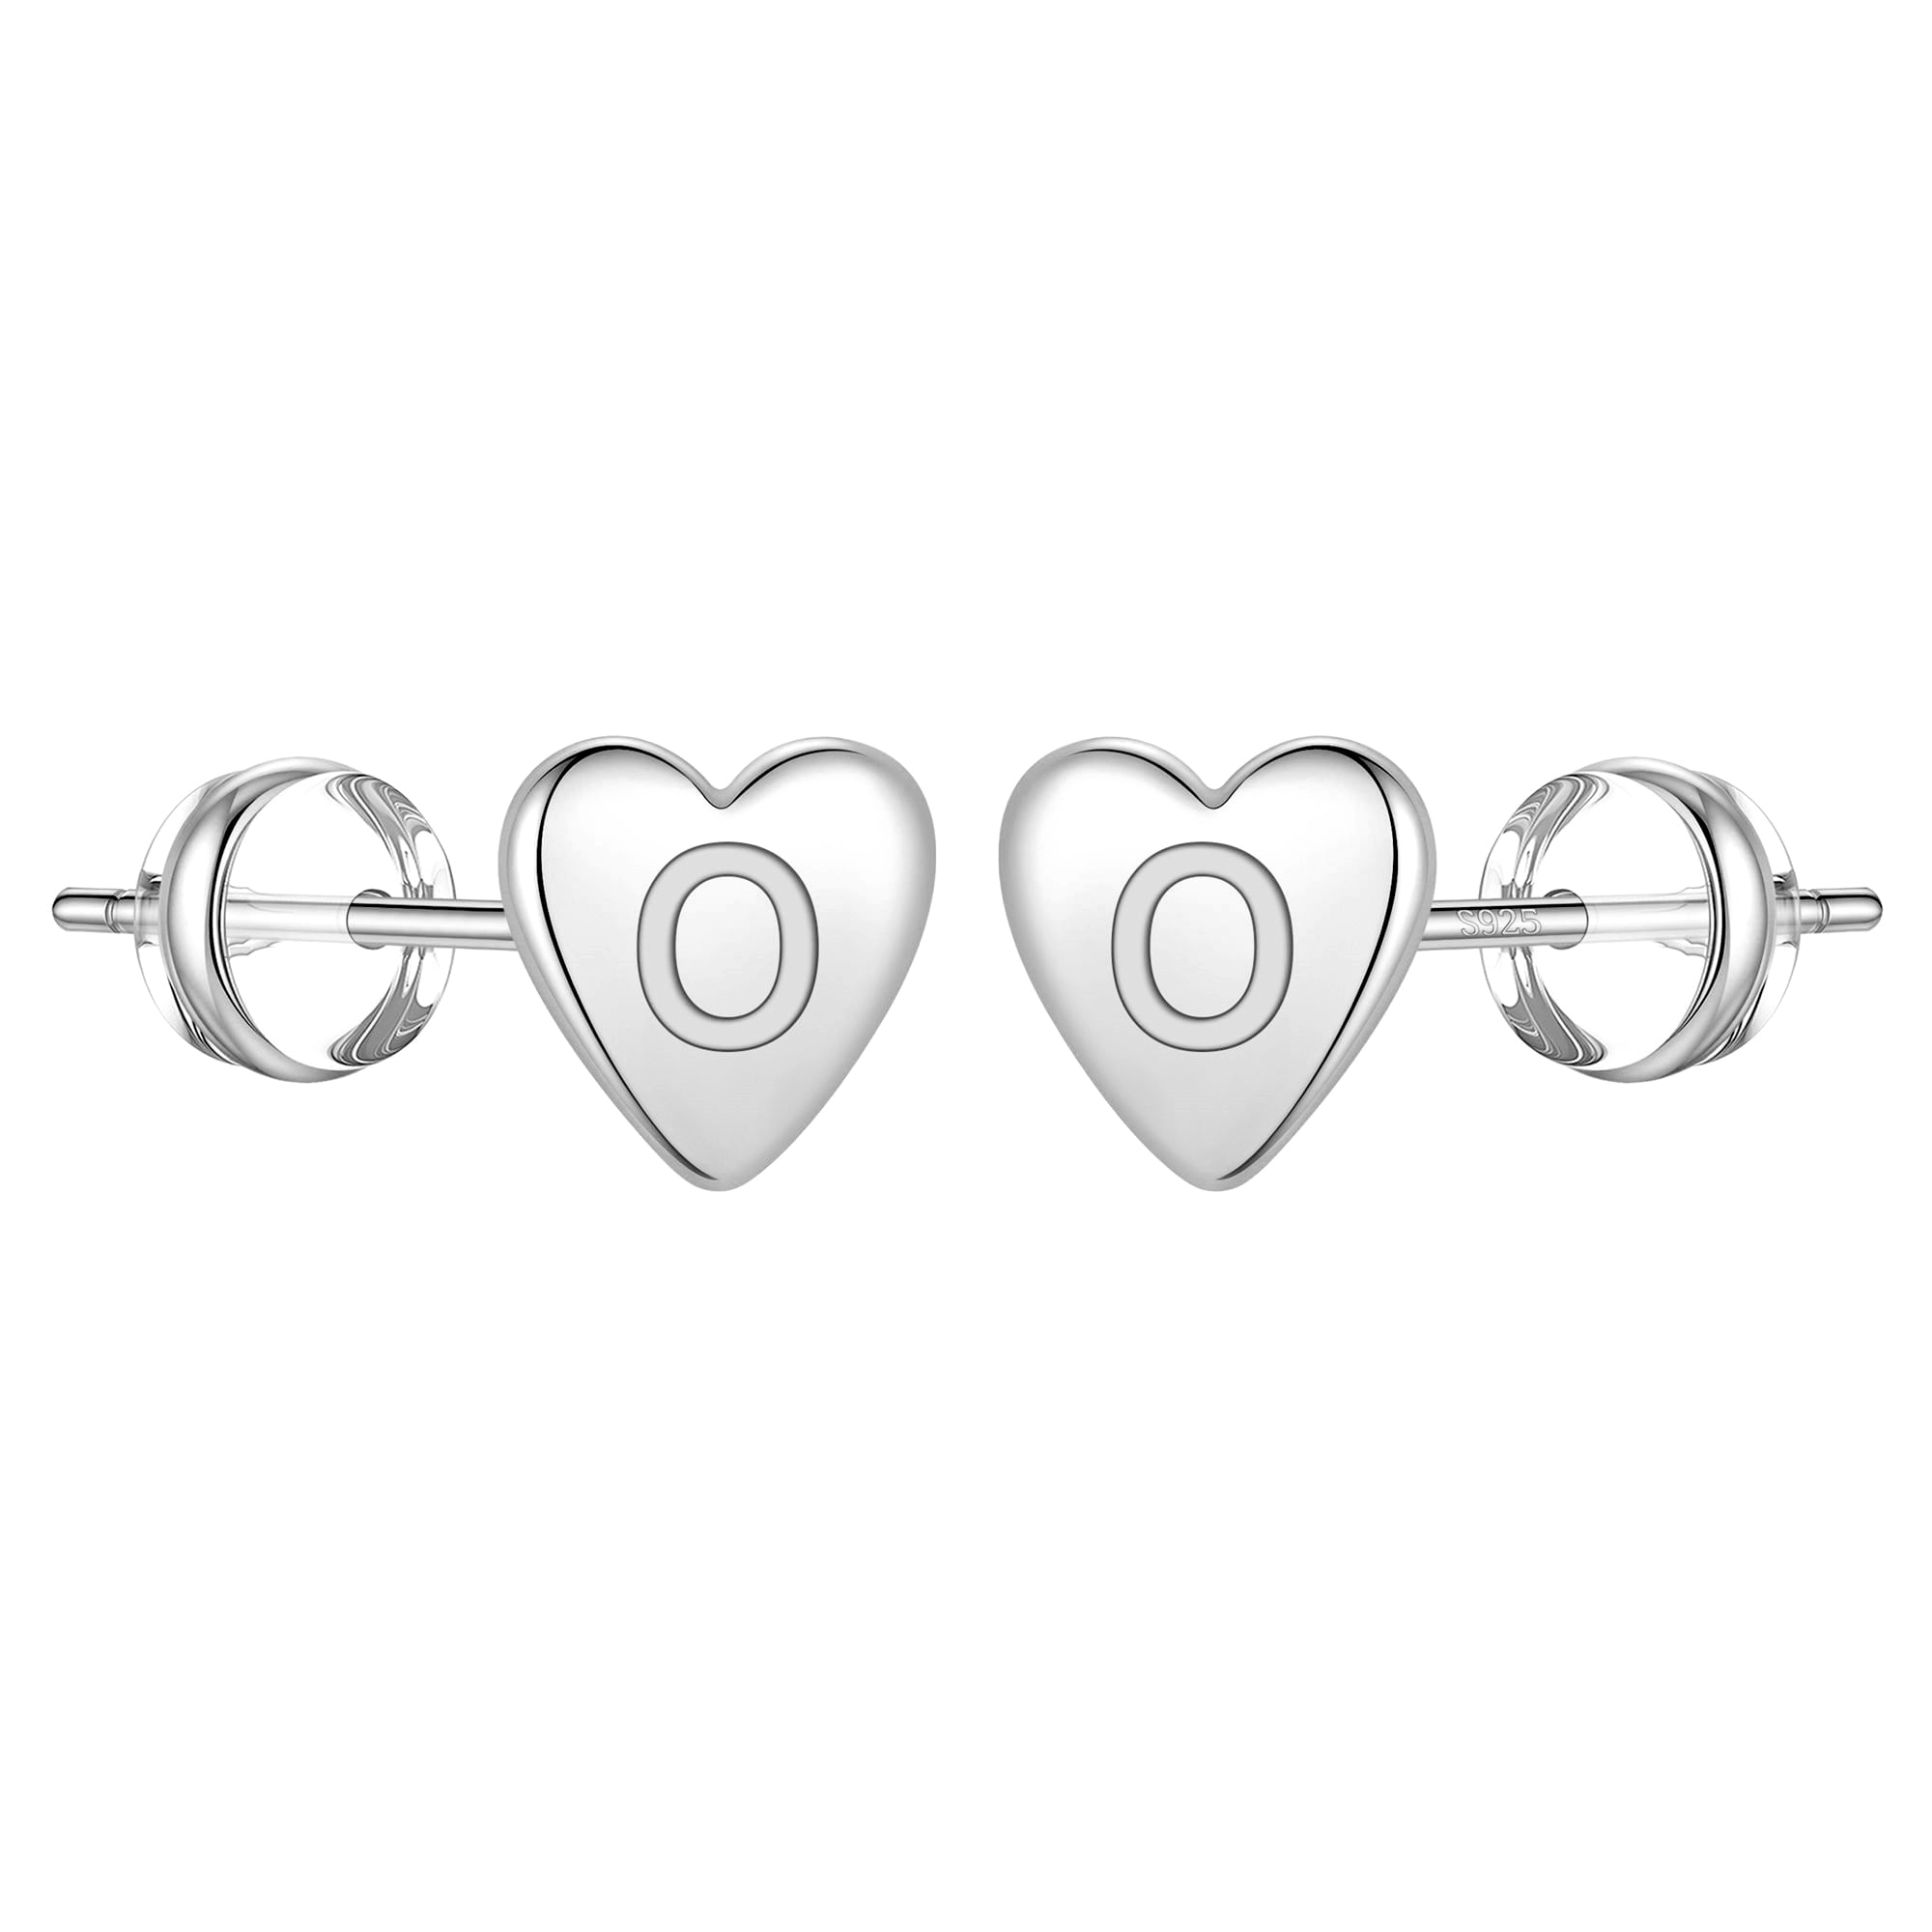 Details about    Hypoallergenic Sterling Silver Sparkly Silver Glitter Heart Stud Earrings For 